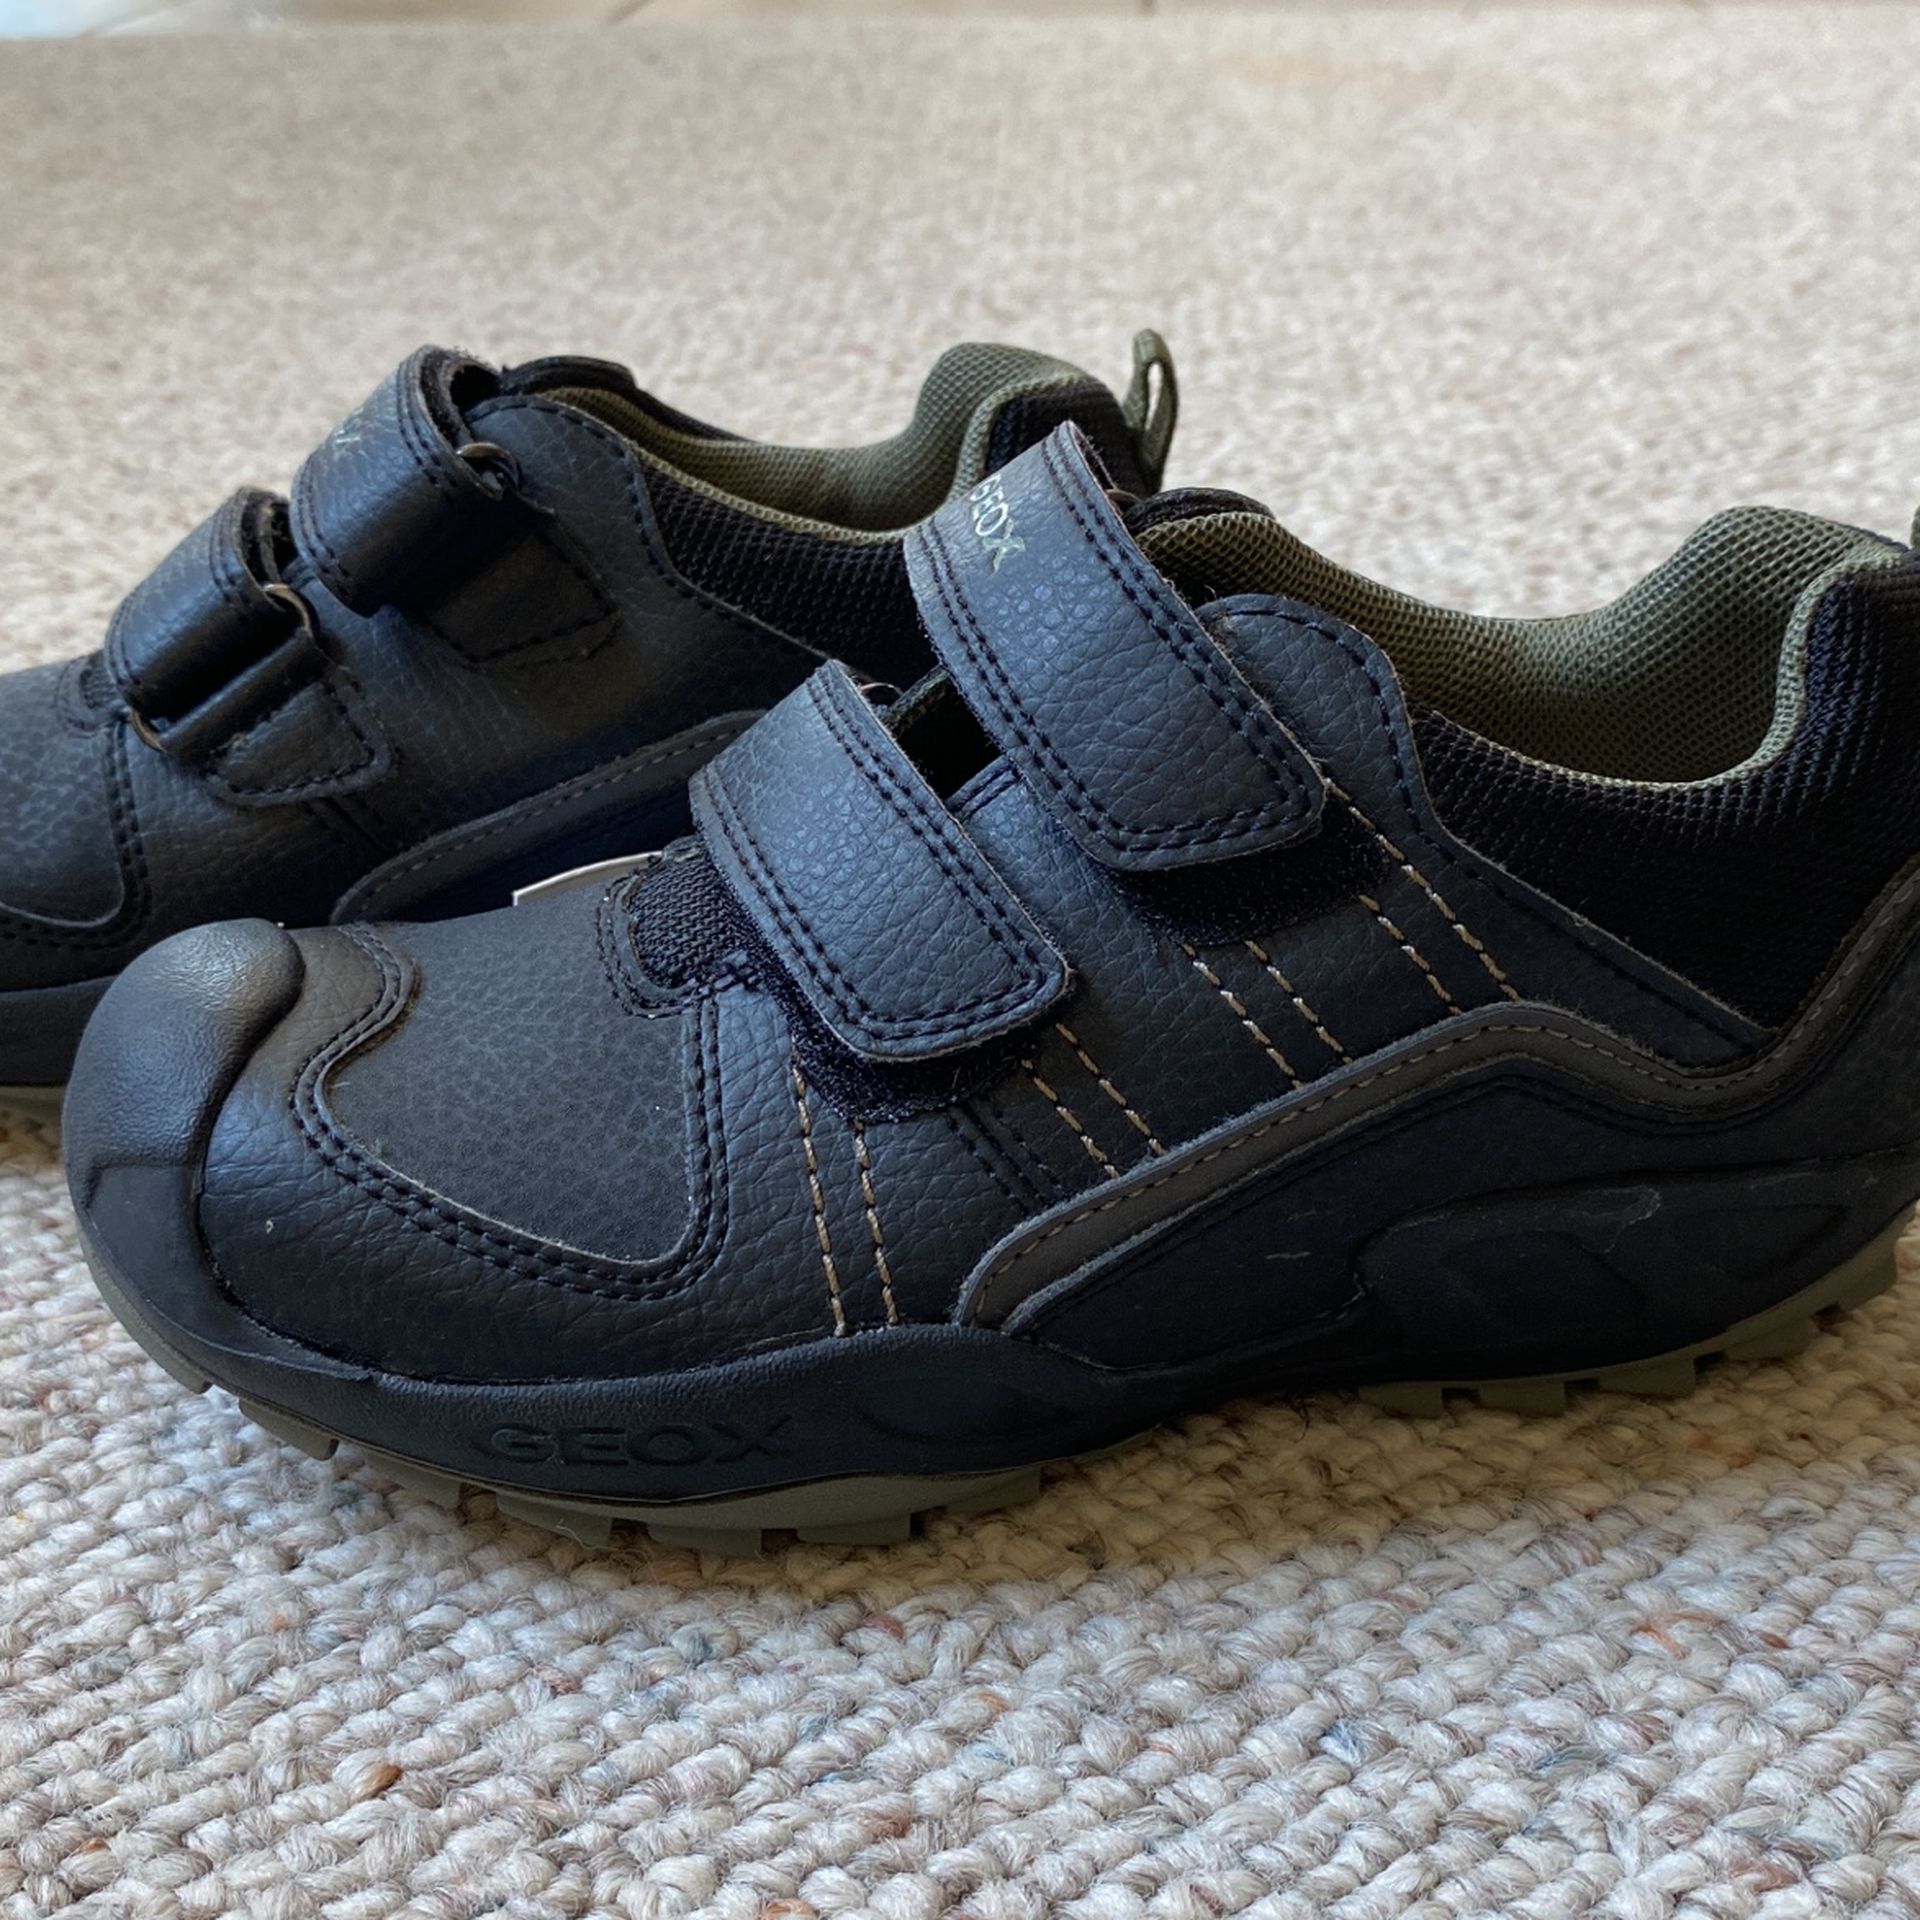 geleider balans Moskee NEW Geox Respira Boys Shoes • Size 31 / US 13 • Black & Olive Green for Sale  in Orland Park, IL - OfferUp